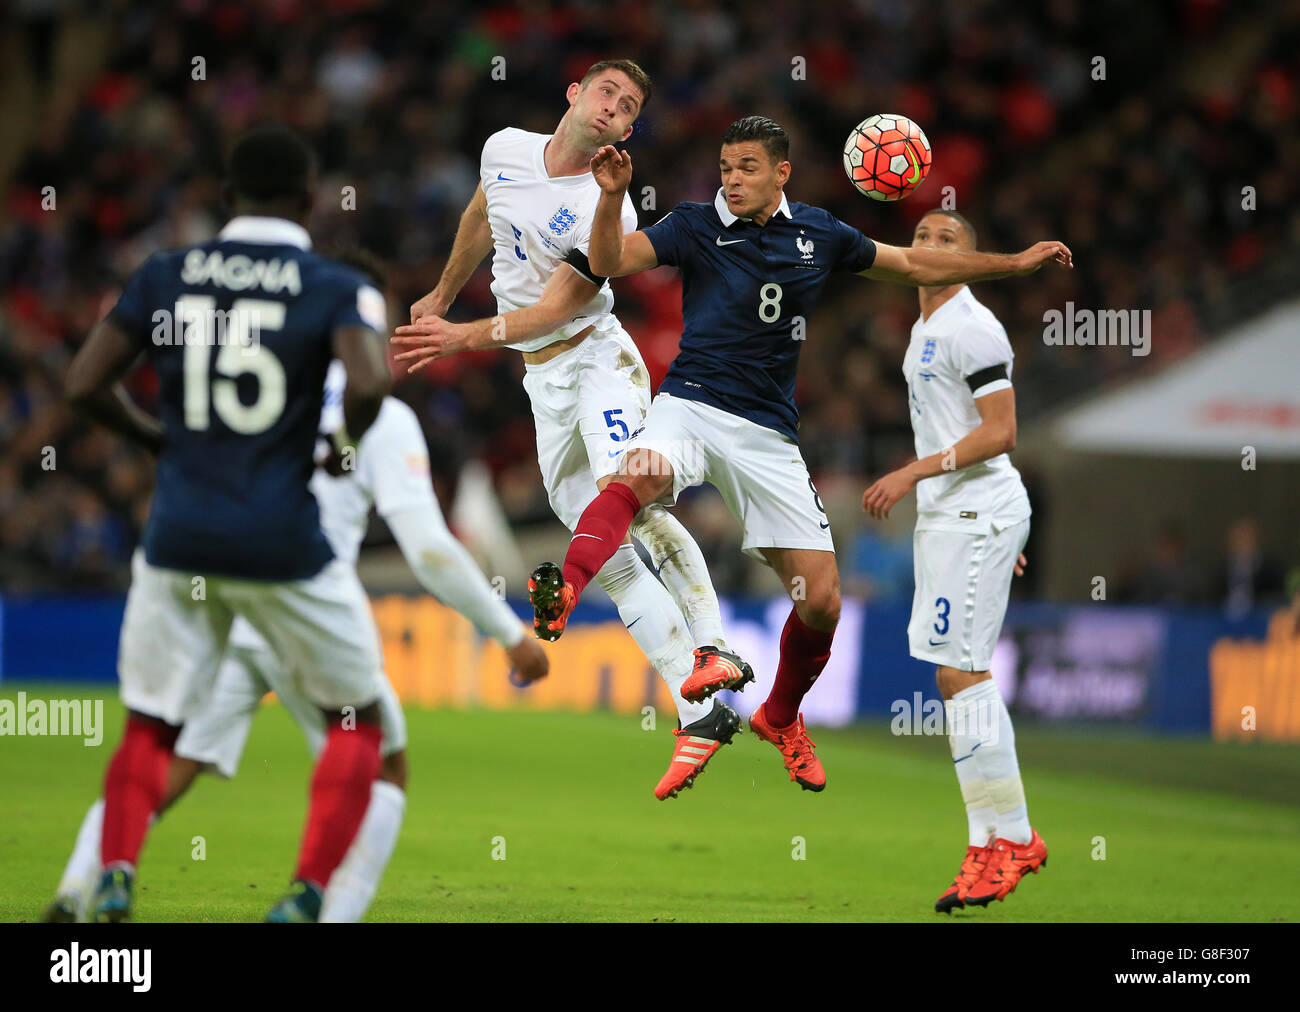 England's Gary Cahill (left) and France's Hatem Ben Arfa battle for the ball during the international friendly match at Wembley Stadium, London. PRESS ASSOCIATION Photo. Picture date: Tuesday November 17, 2015. See PA story SOCCER England. Photo credit should read: Nick Potts/PA Wire. No editing except cropping. Call +44 (0)1158 447447 or see paphotos.com/info for full restrictions and further information. Stock Photo